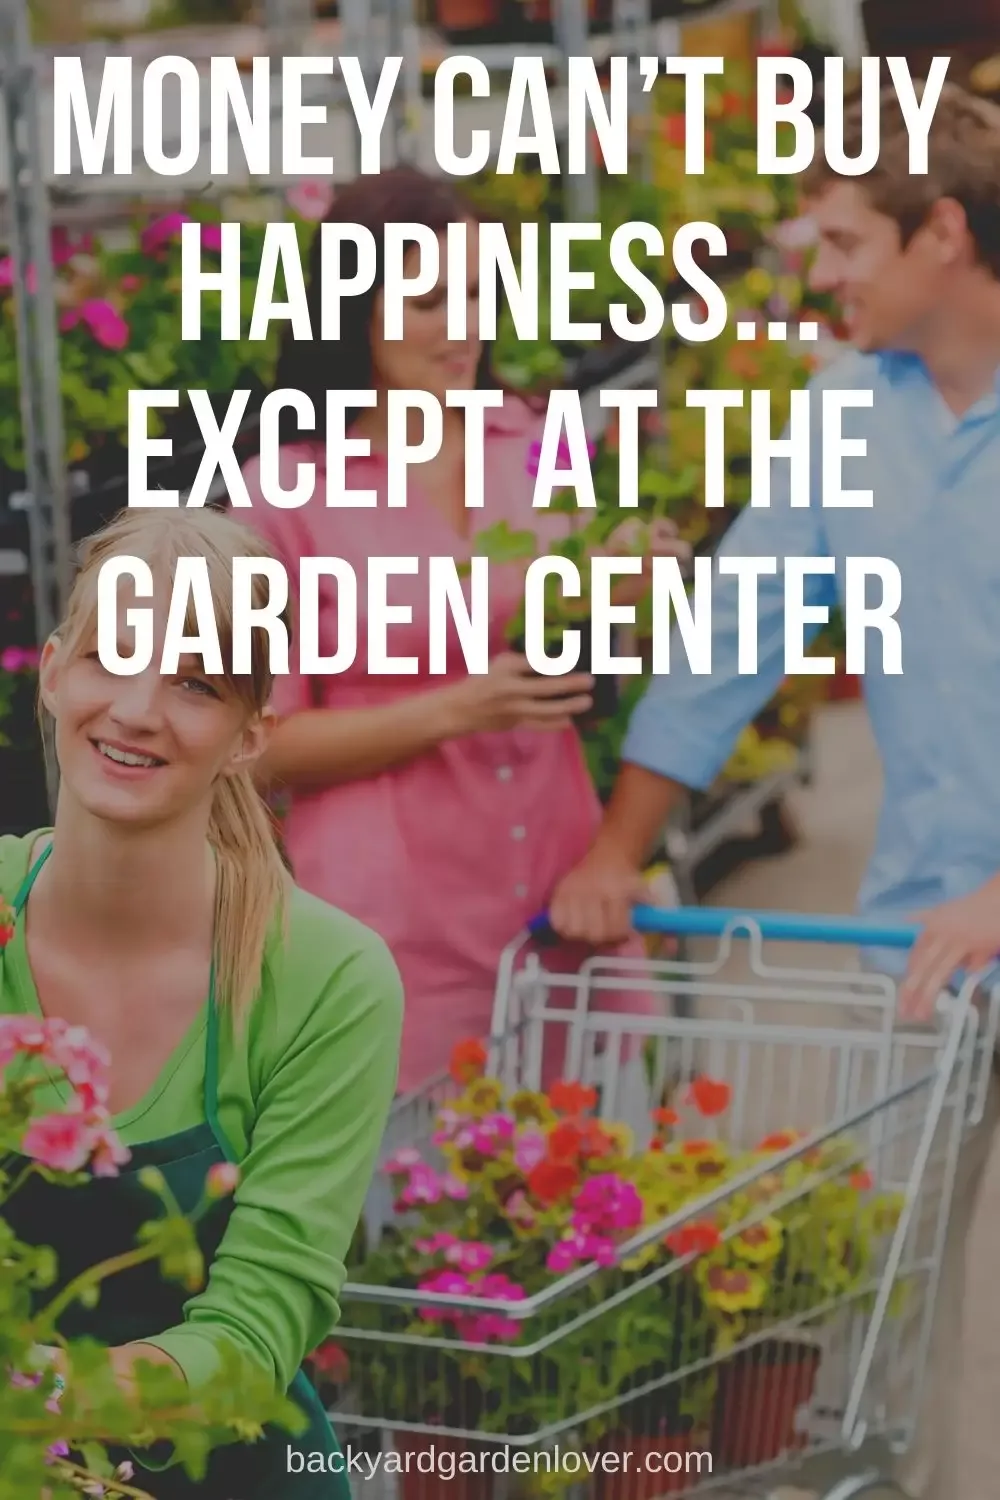 Money can’t buy happiness. Except at the garden center.